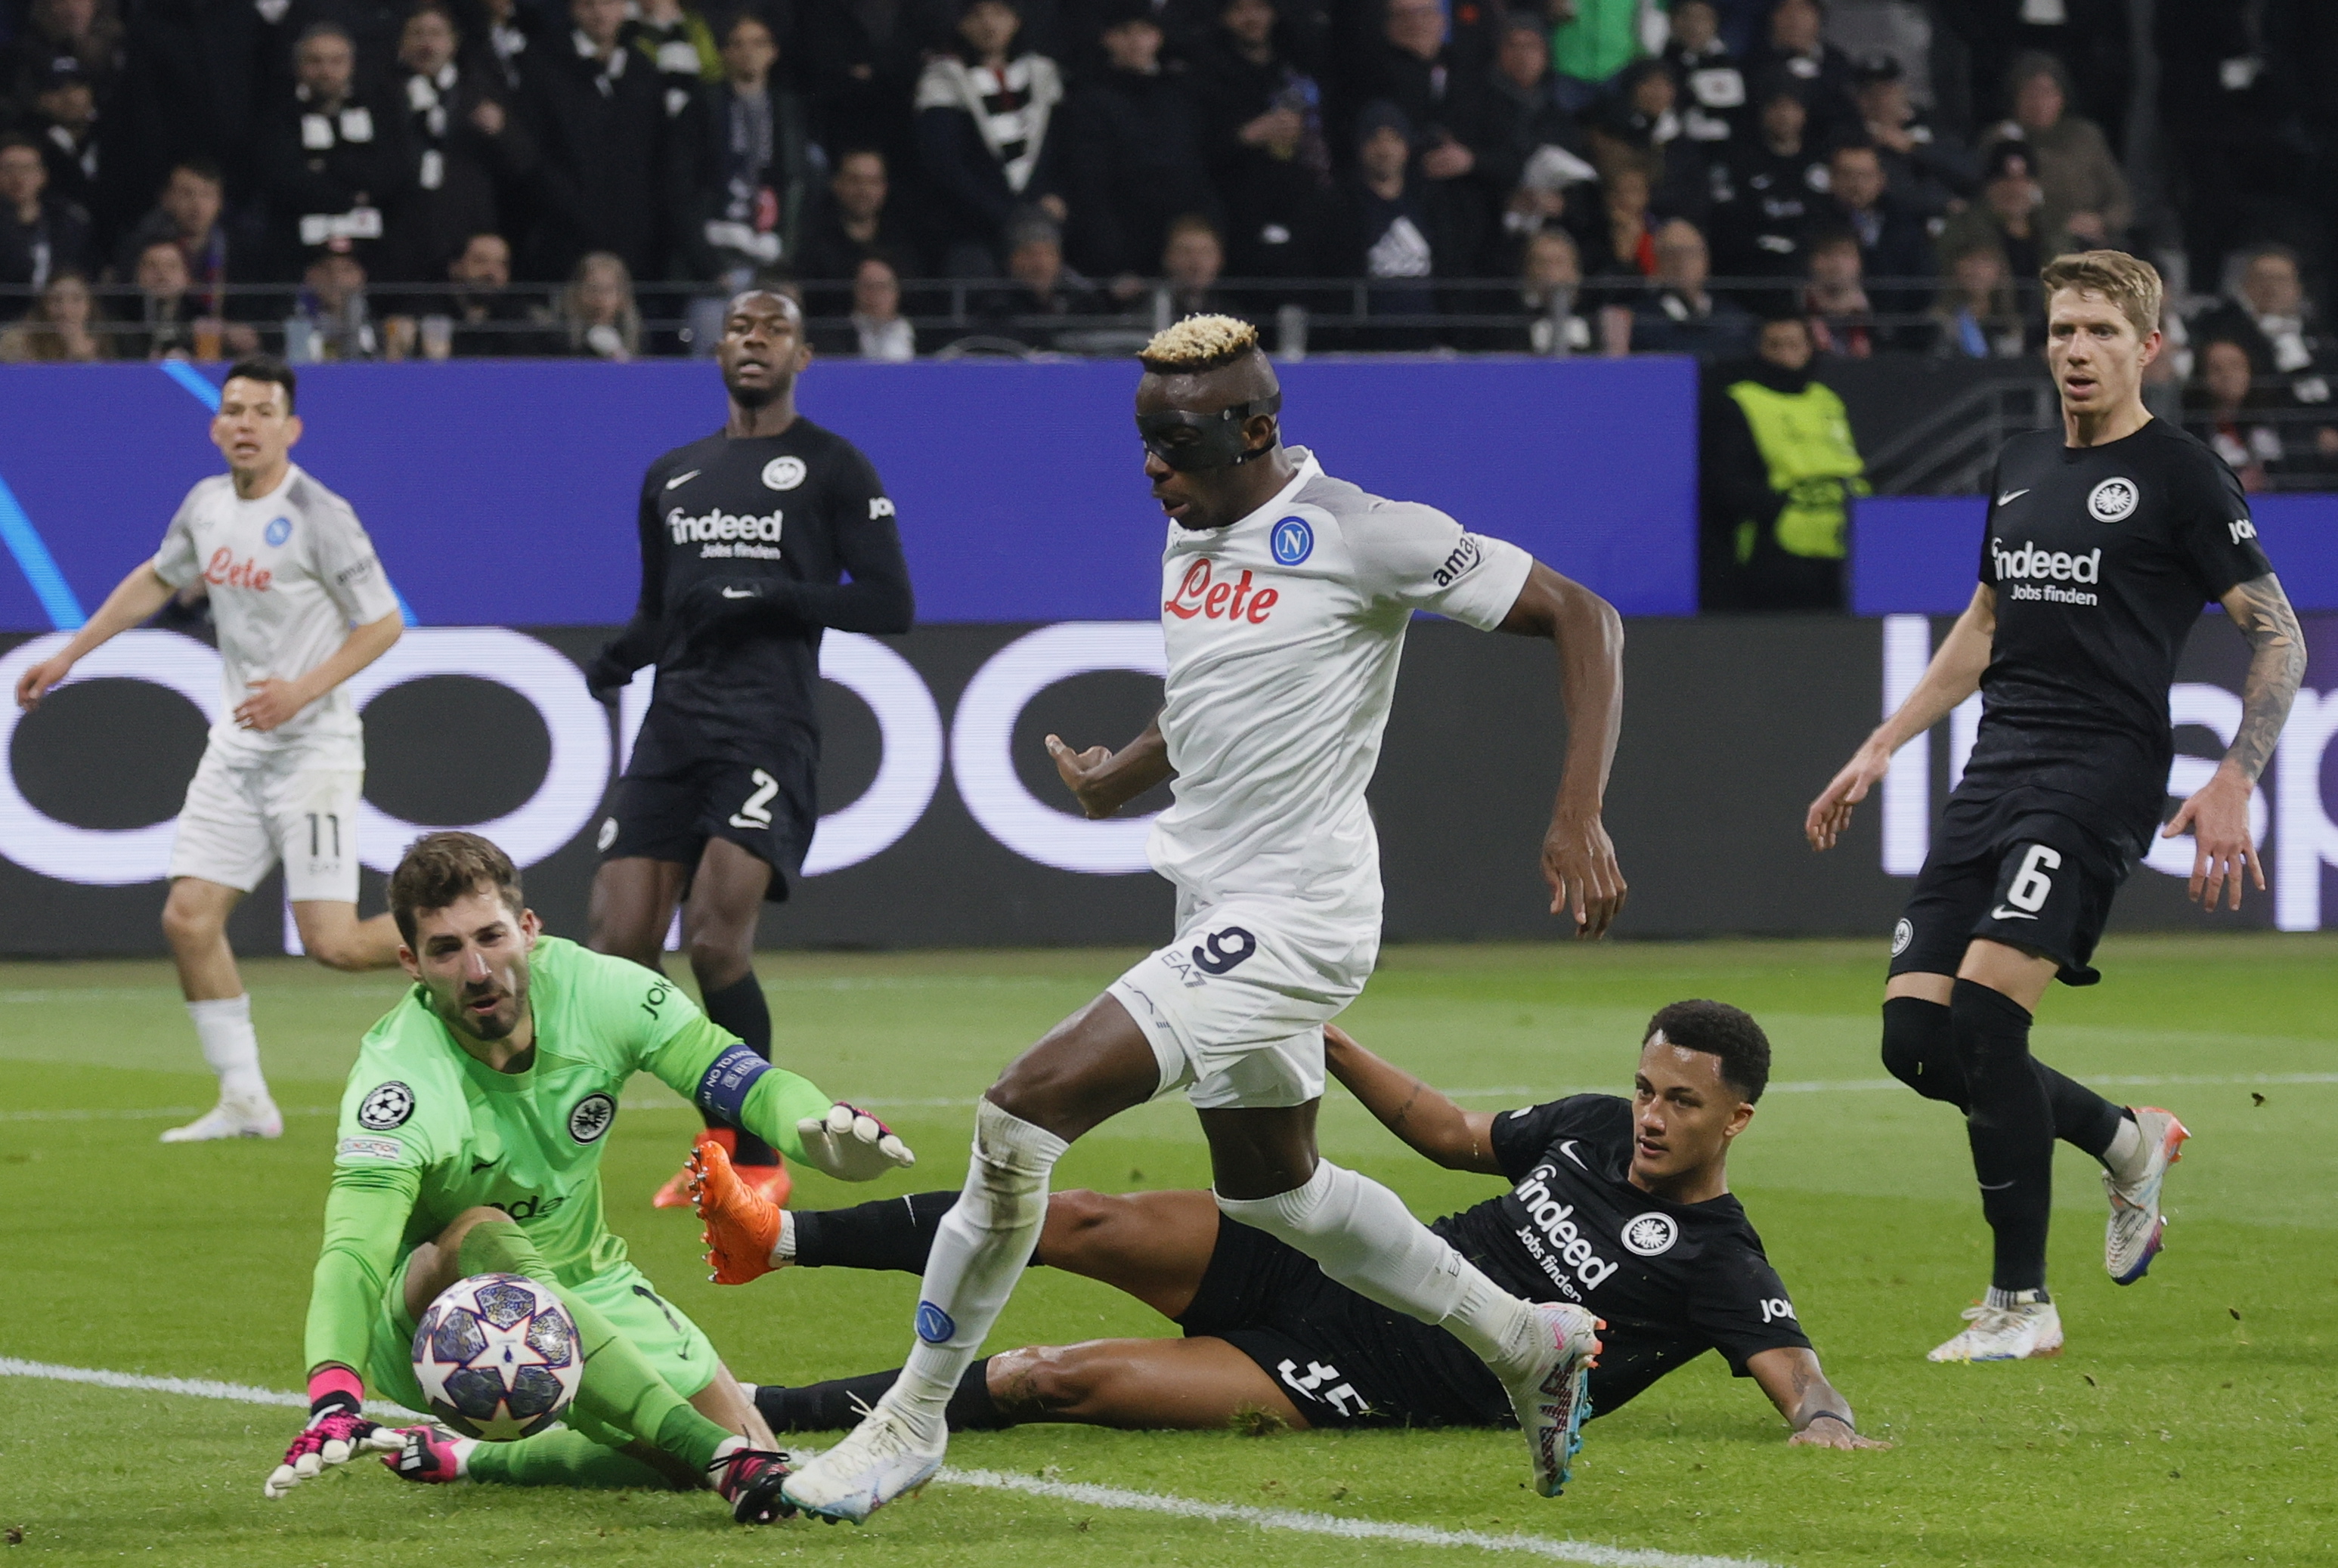 Frankfurt (Germany), 21/02/2023.- Napoli's Victor Osimhen (C) in action against Frankfurt's goalkeeper Kevin Trapp (L) and Tuta (R) during the UEFA Champions League, Round of 16, 1st leg between Eintracht Frankfurt and SSC Napoli in Frankfurt, Germany, 21 February 2023. (Liga de Campeones, Alemania) EFE/EPA/Ronald Wittek